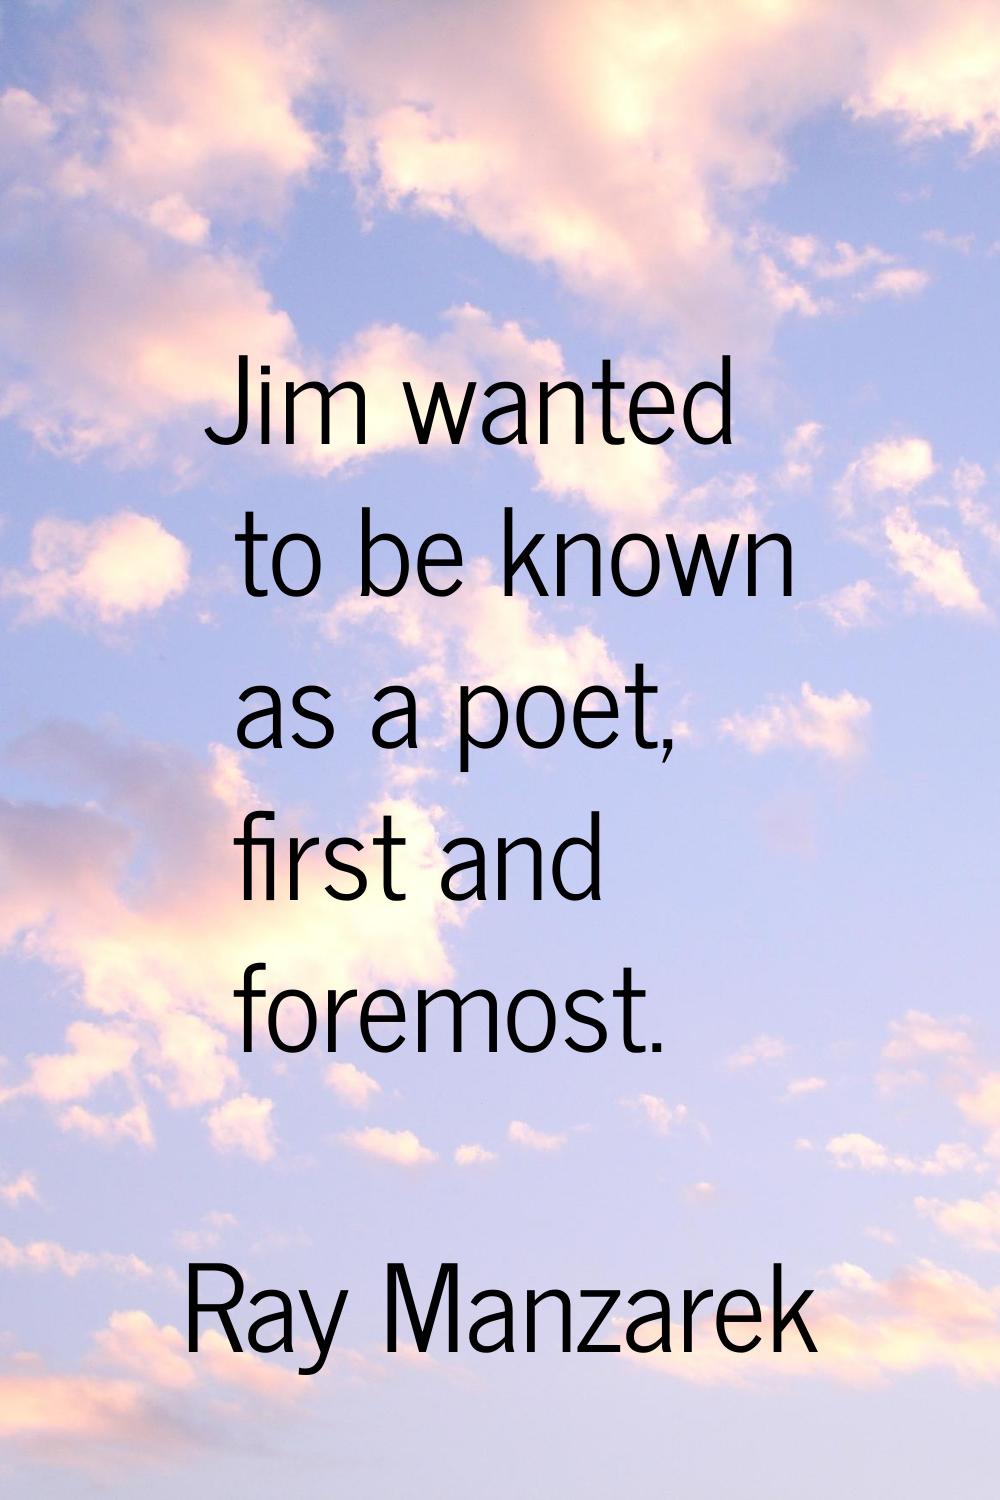 Jim wanted to be known as a poet, first and foremost.